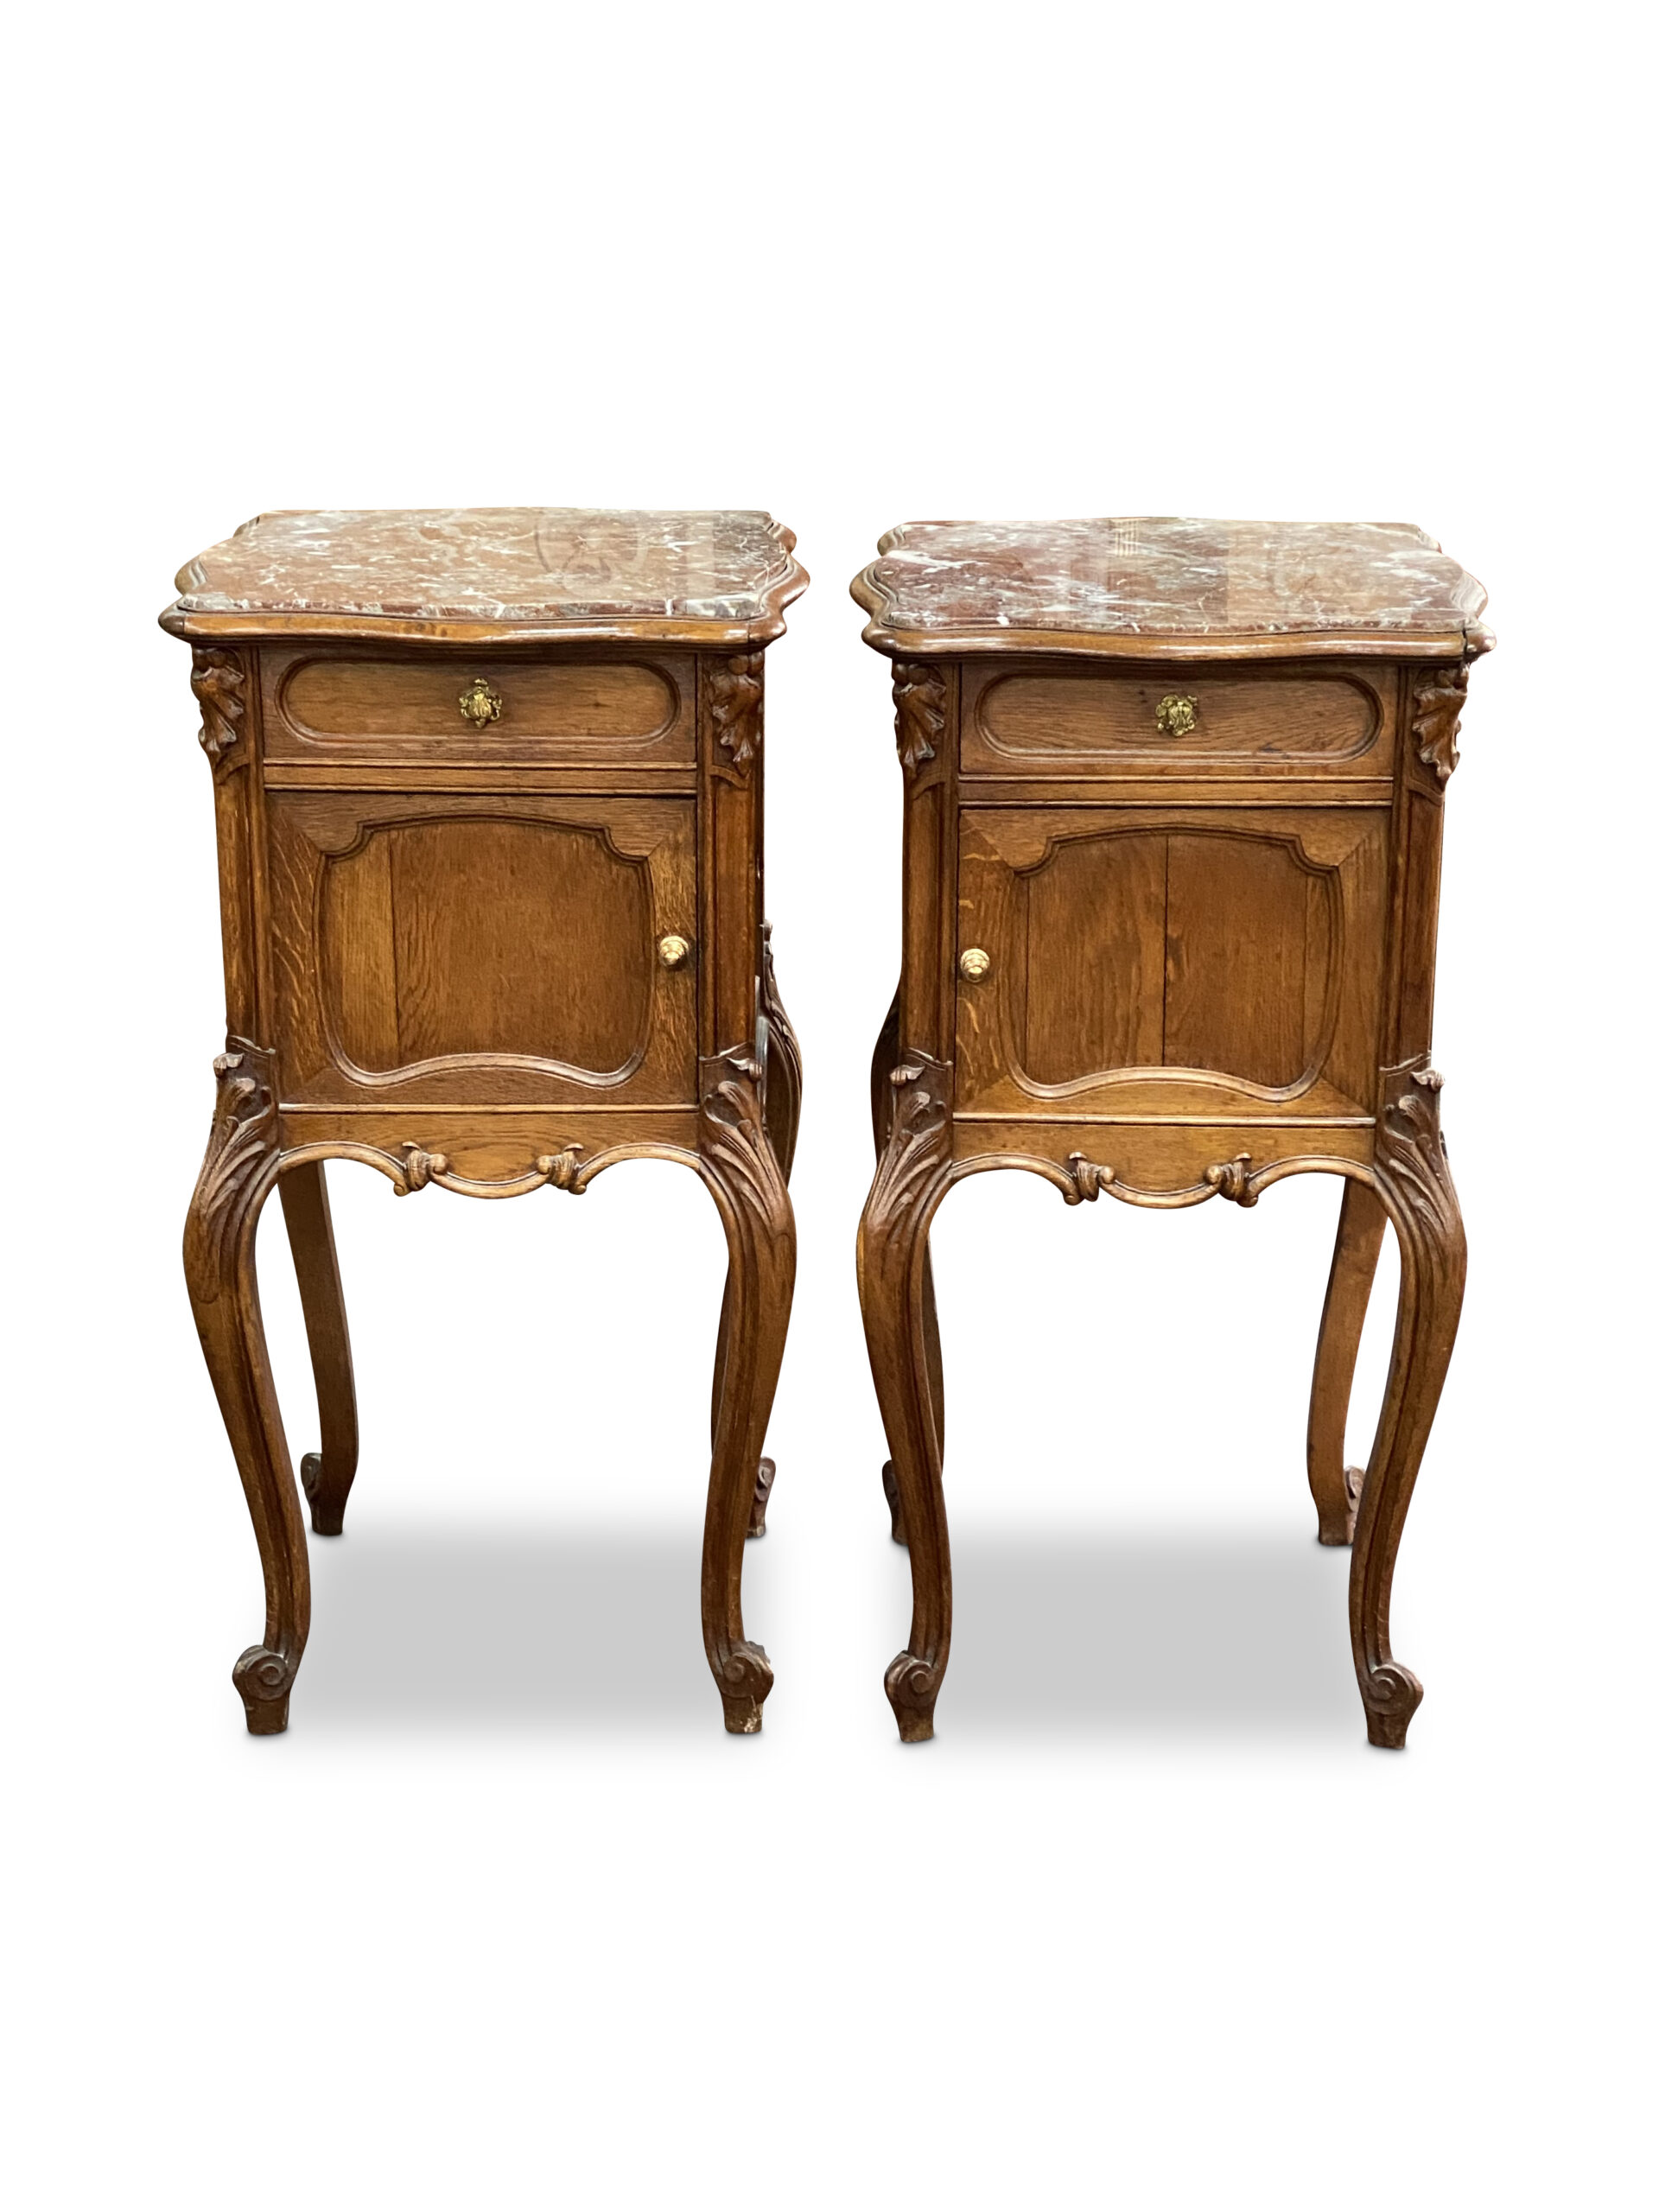 7275 Pair of French Louis XV Style Oak Marble Top Bedside Cabinets with Single Drawer c.19002 scaled 1